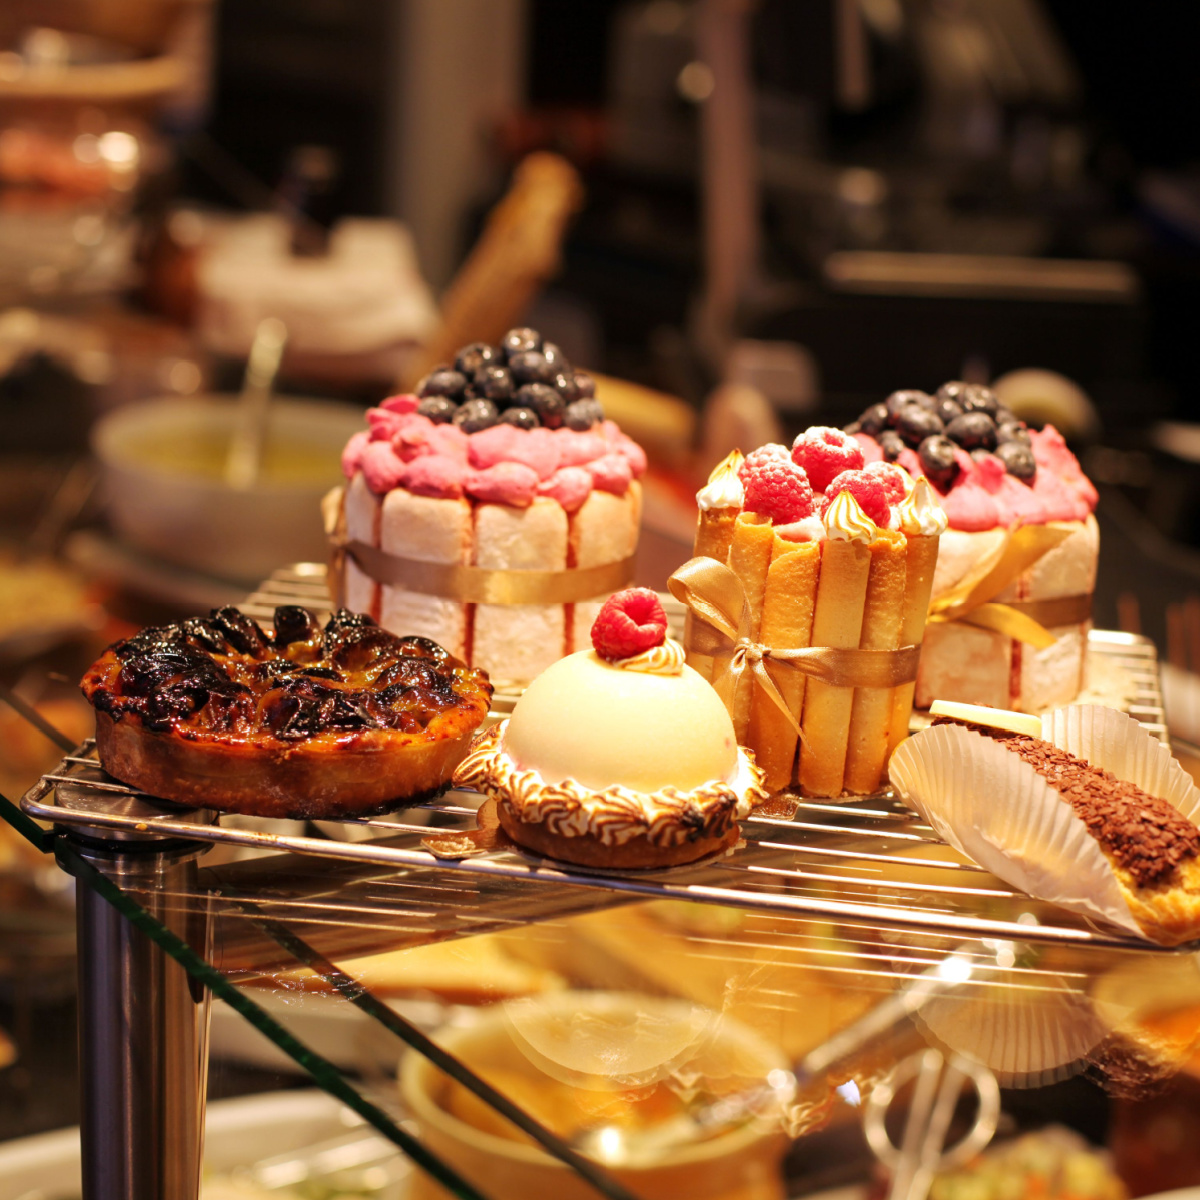 pastry cakes at bakery shop